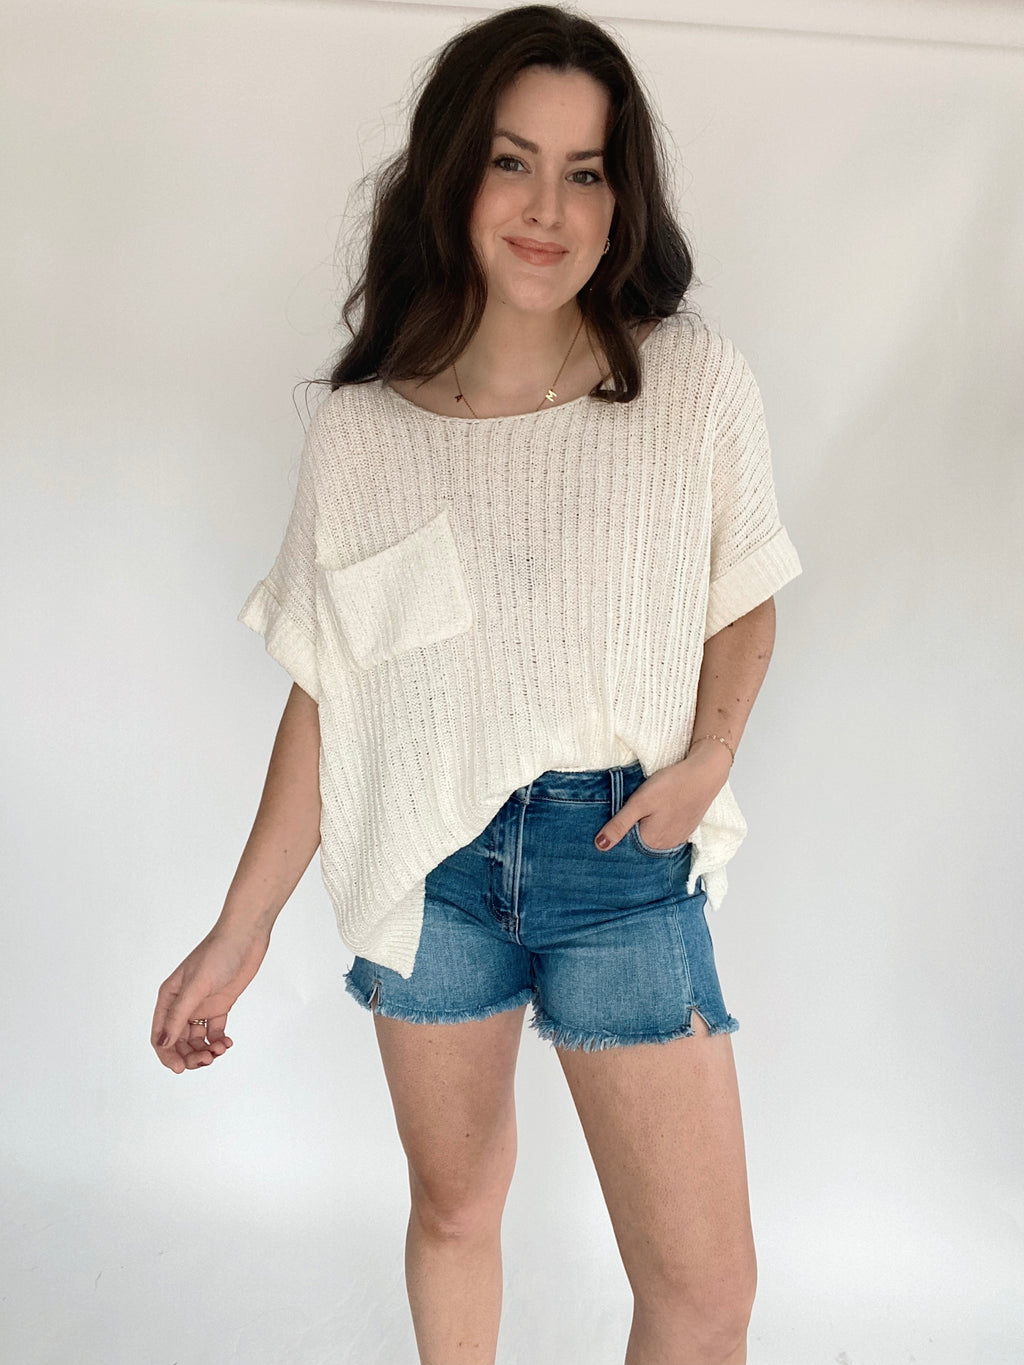 How Good Knit Top - White